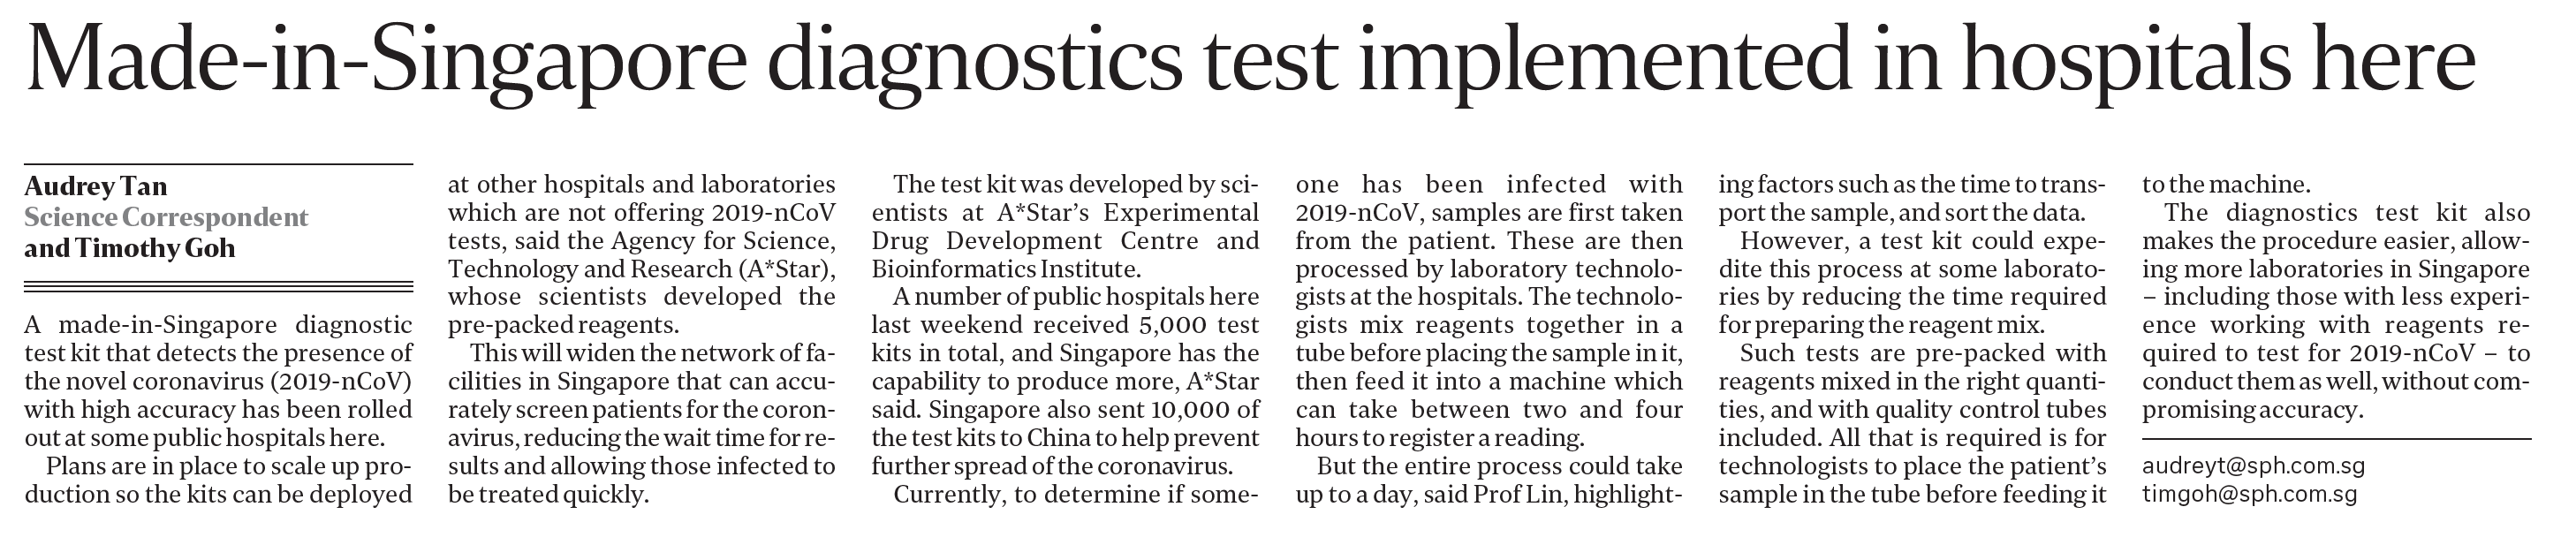 SunTimes, 9 Feb 2020, pA10 - Made-in-Singapore diagnostics test implemented in hospitals here